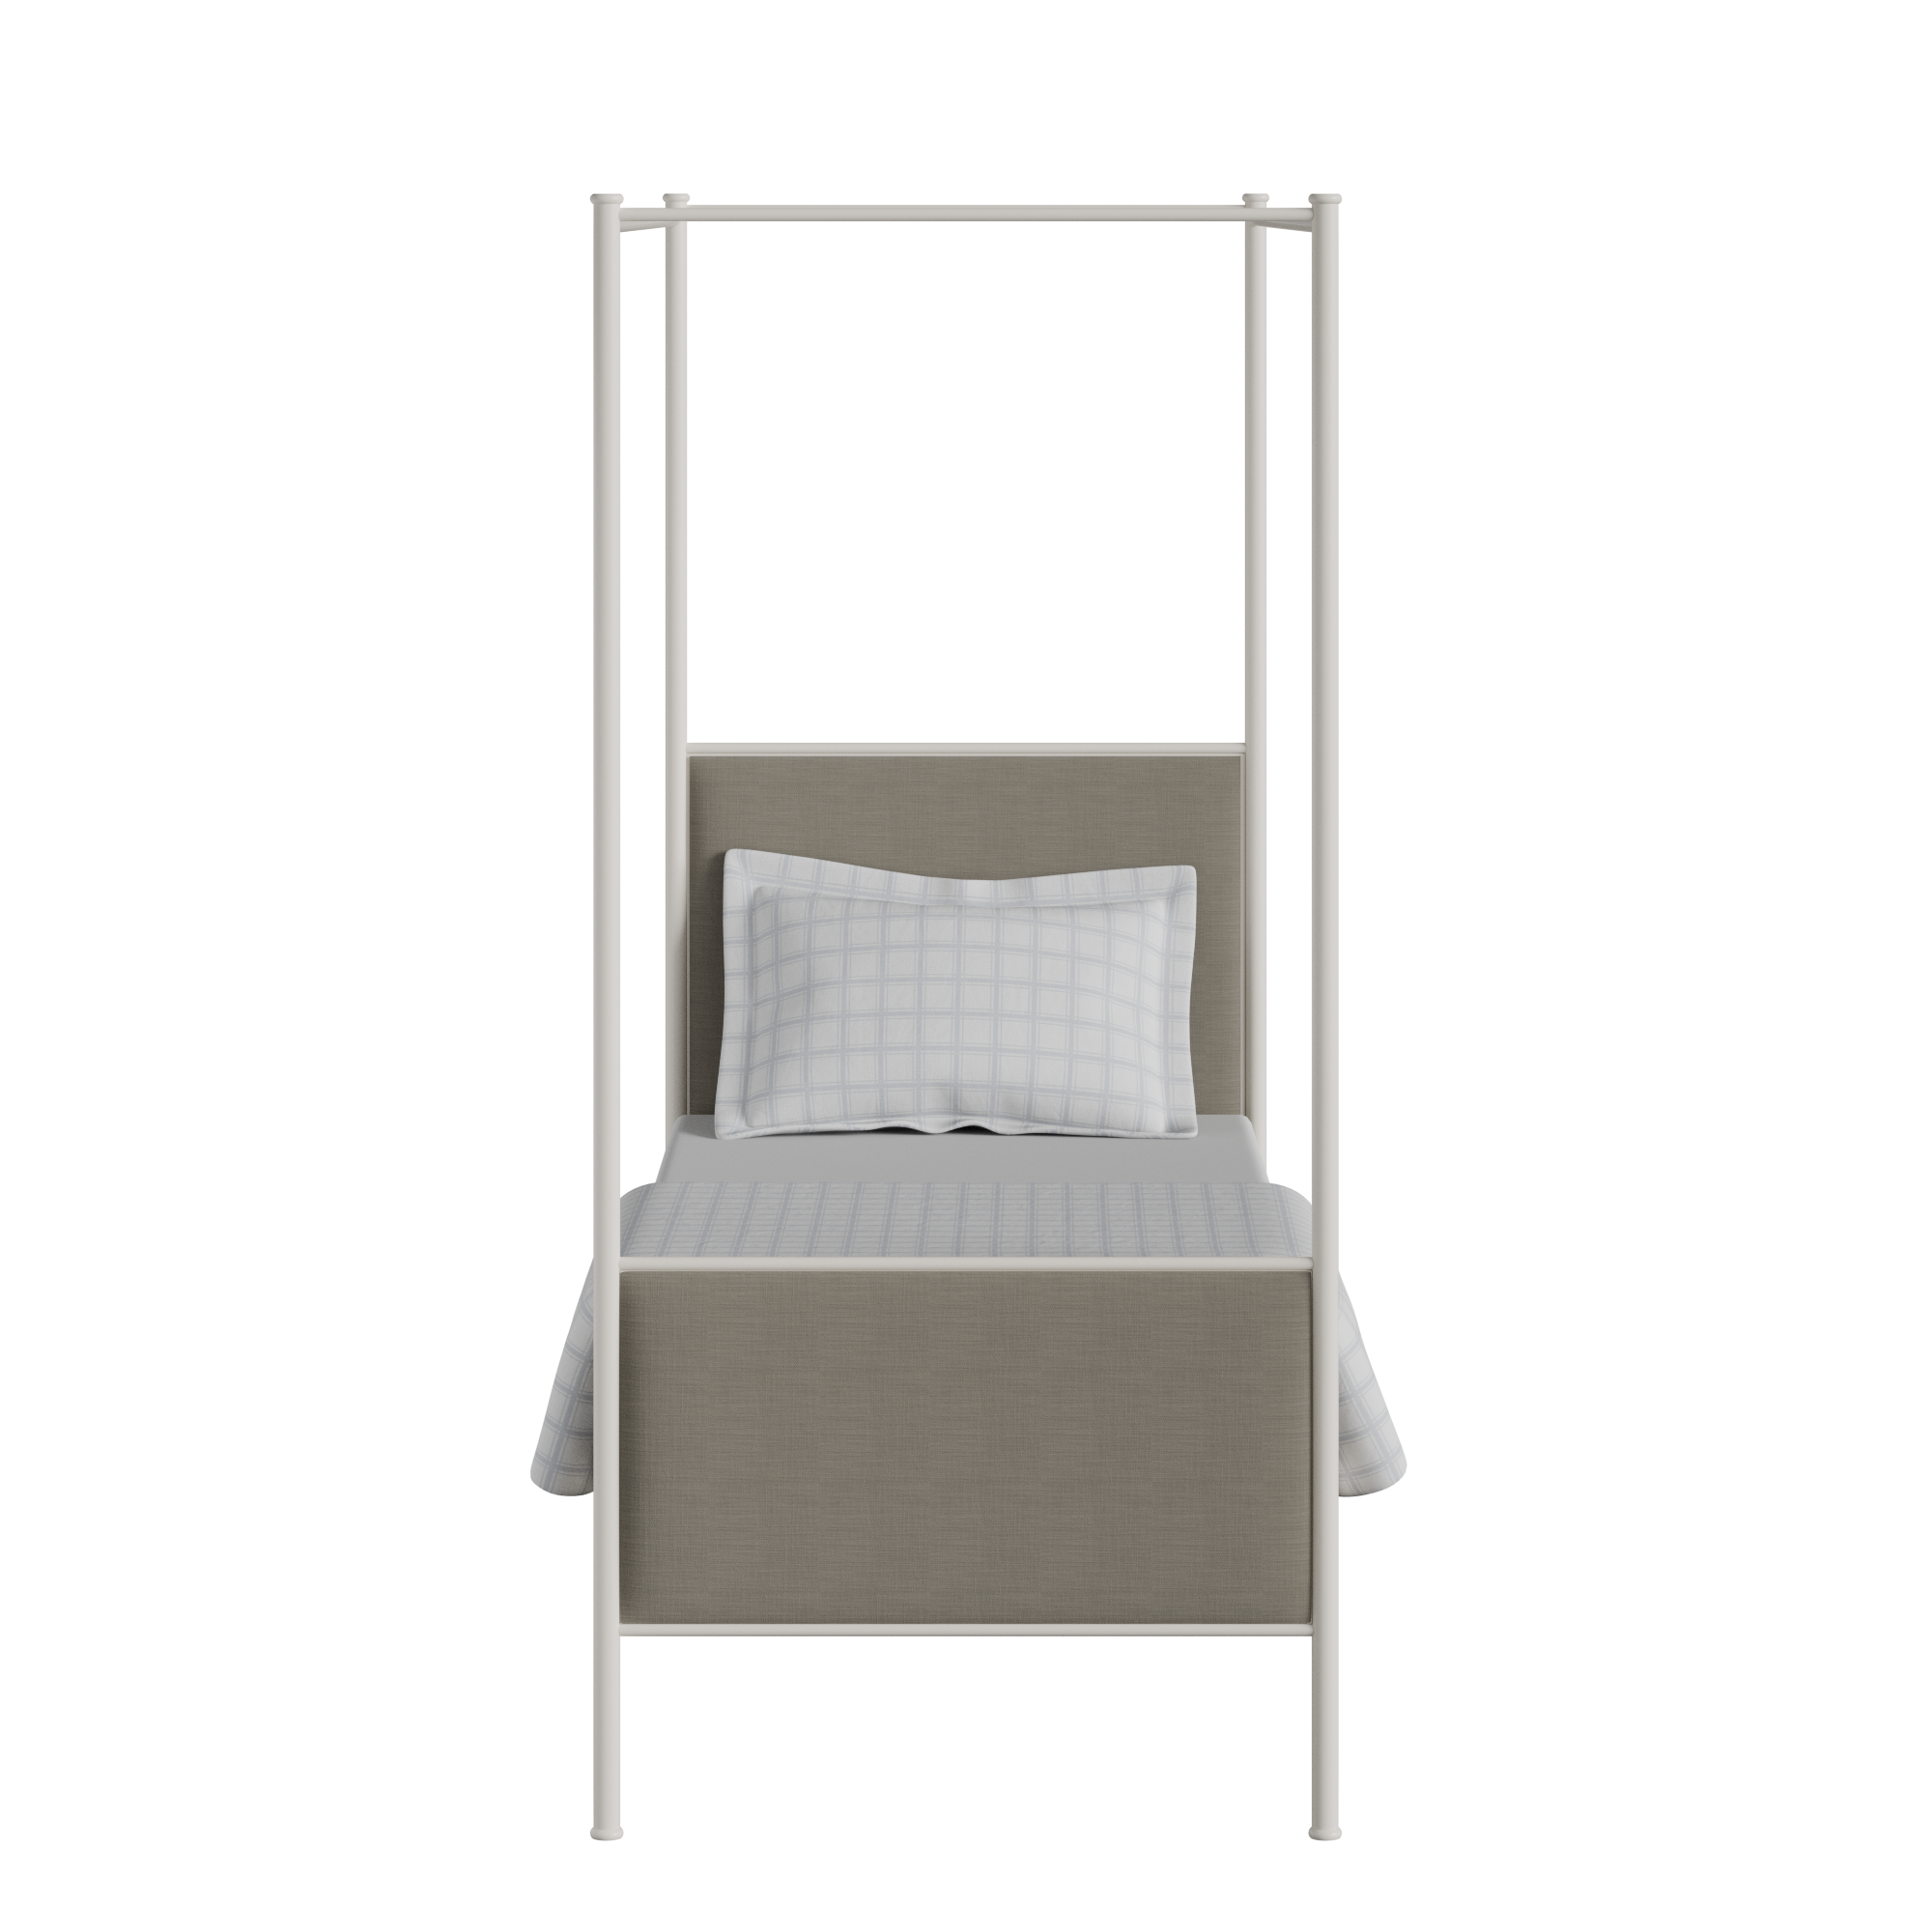 Reims iron/metal single bed in ivory